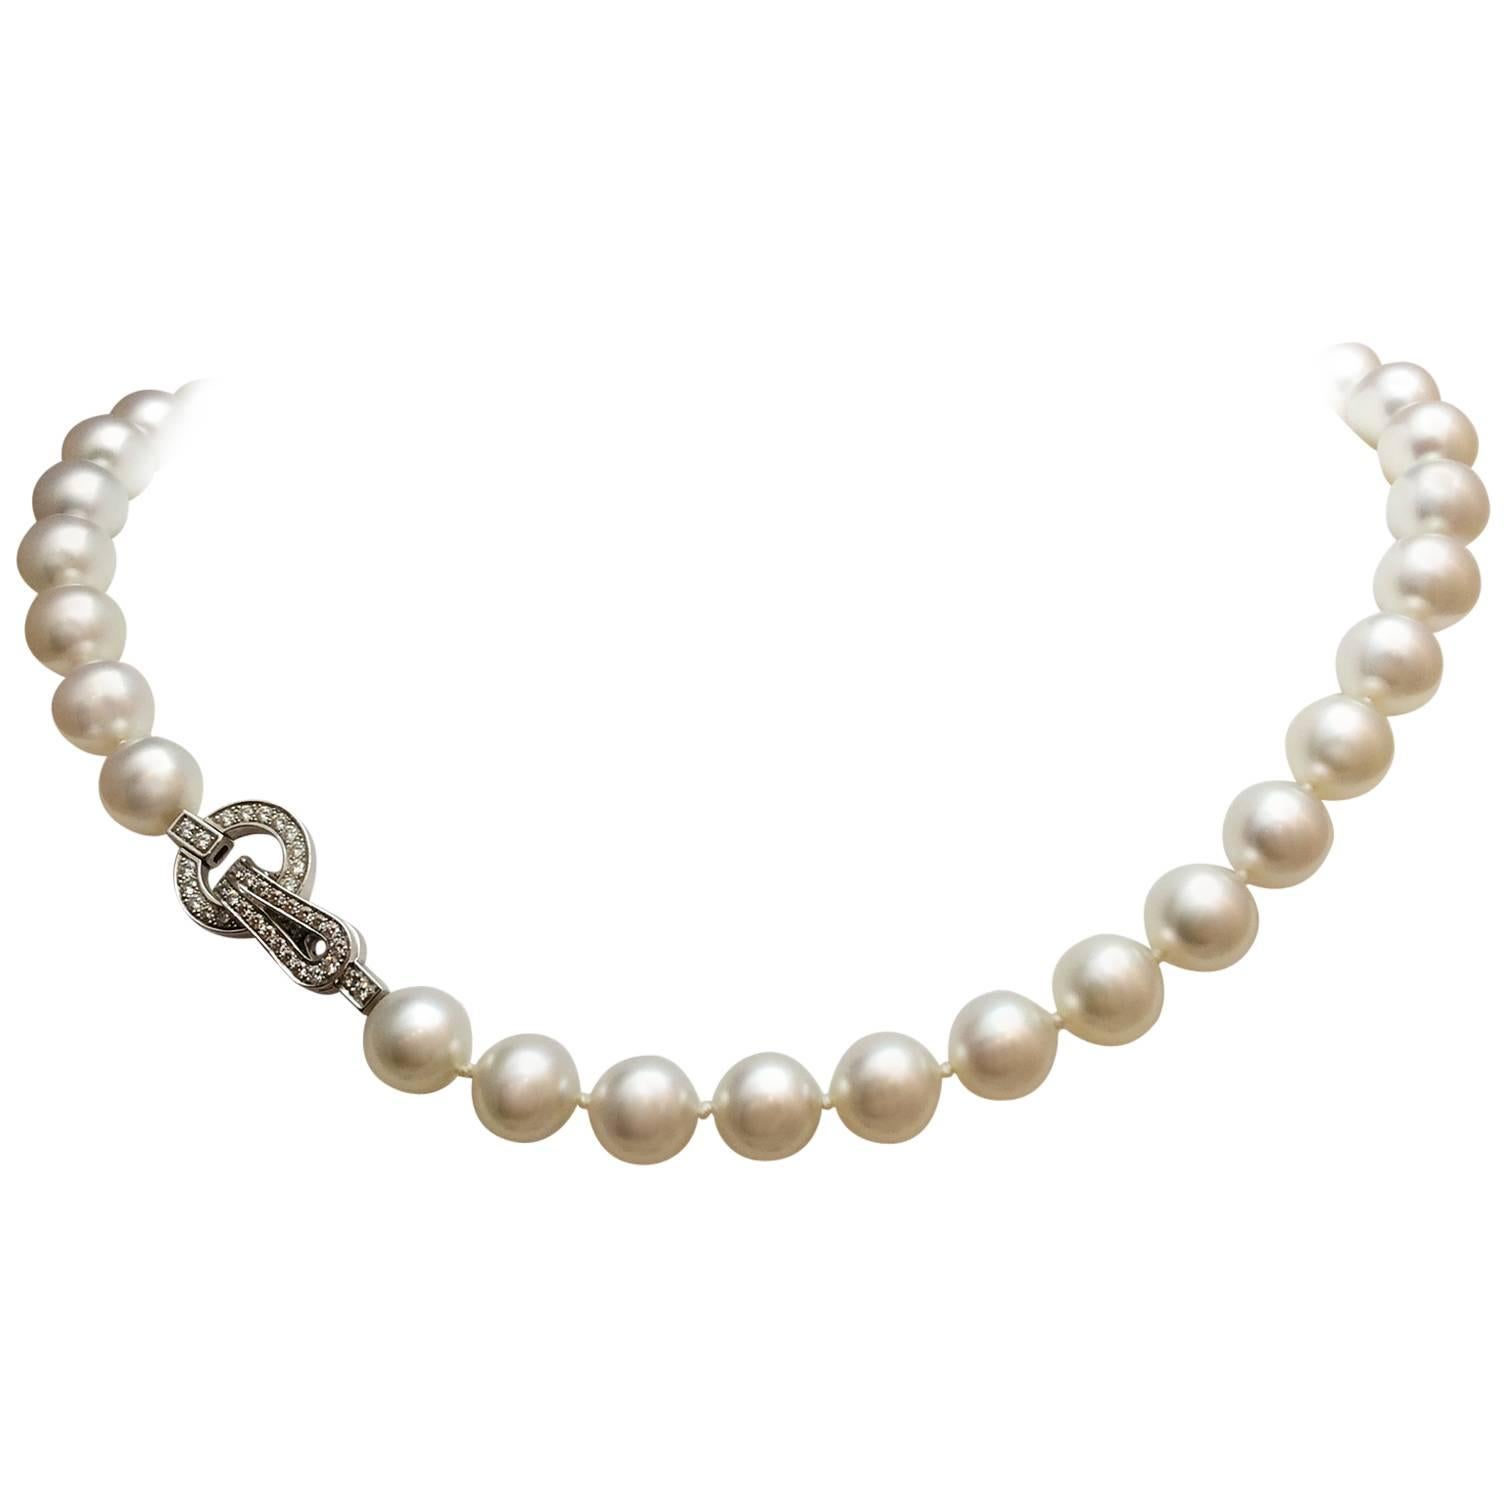 Exceptional Cartier South Sea Pearls 